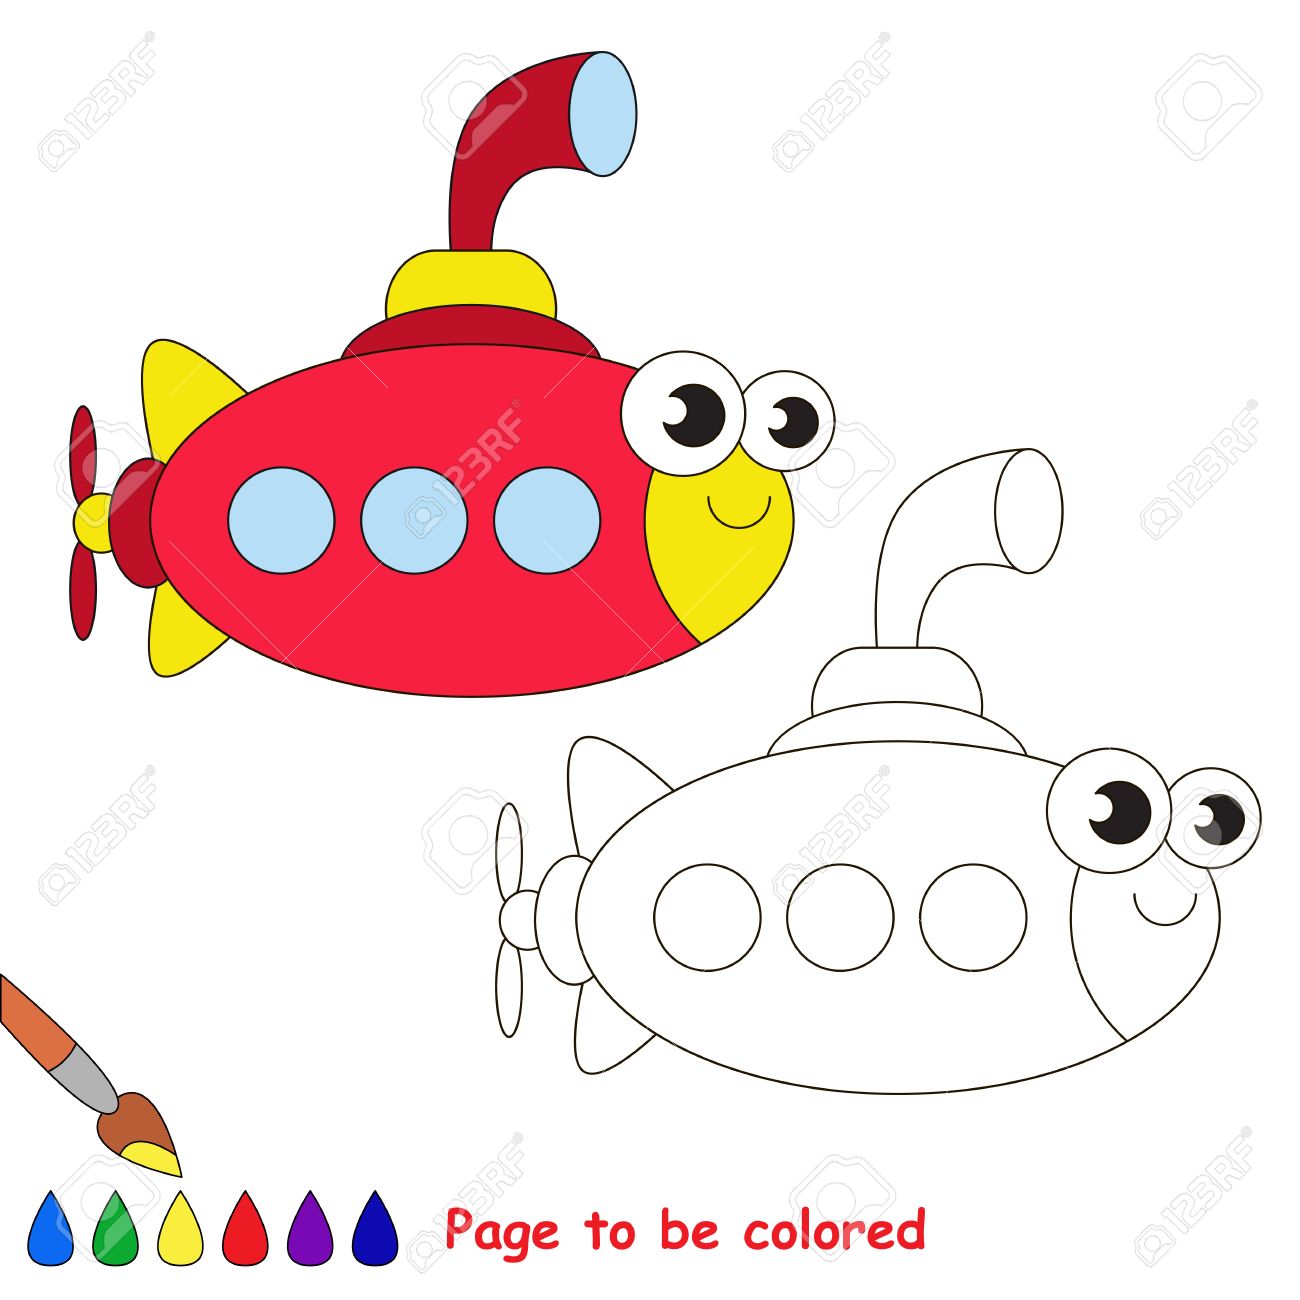 Red submarine to be colored coloring book to educate kids learn colors visual educational game easy kid gaming and primary education simple level of difficulty coloring pages royalty free svg cliparts vectors